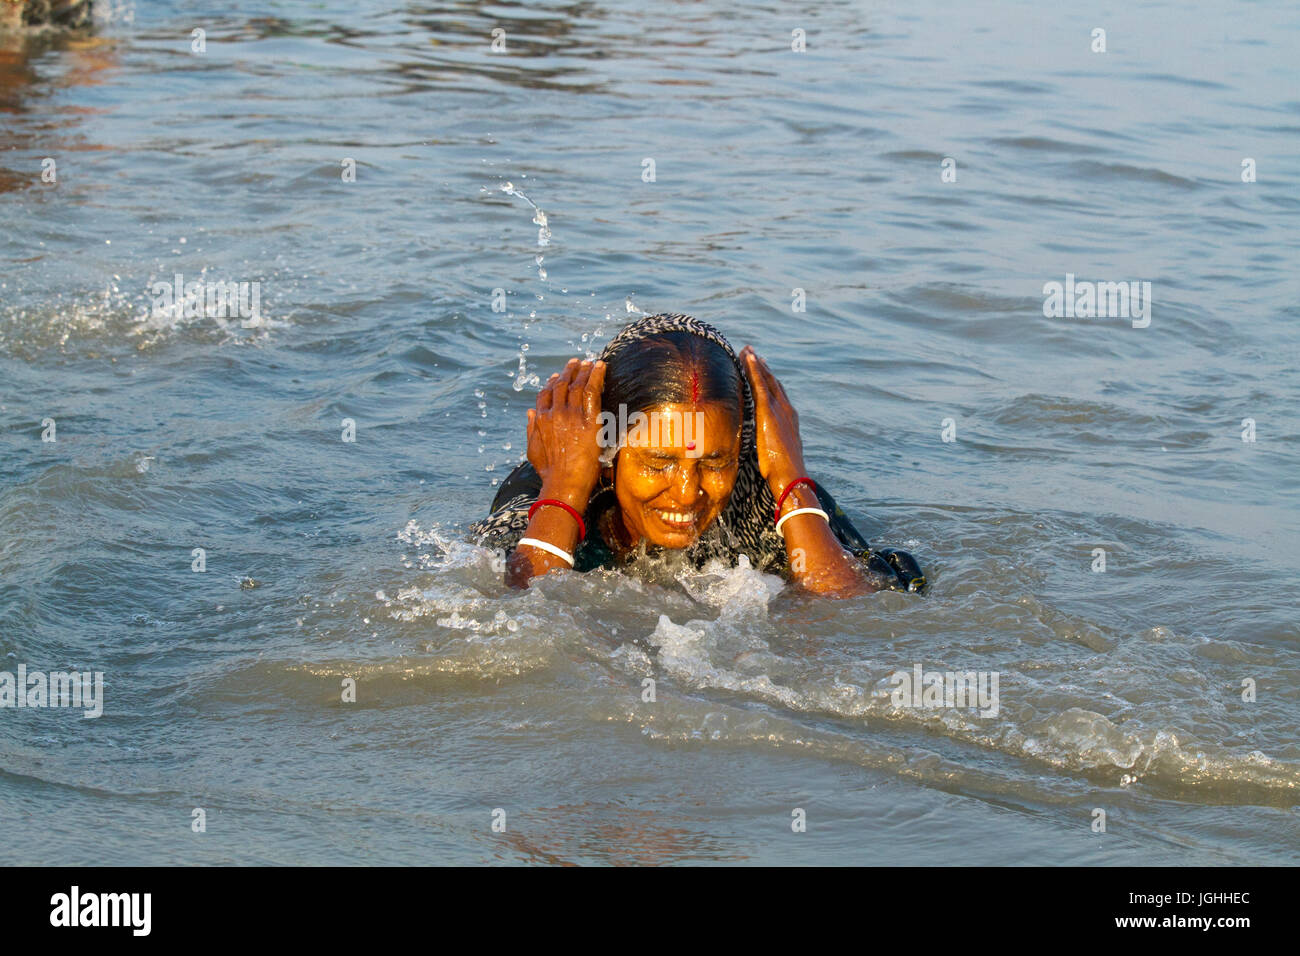 A woman from the Hindu community bathes at the Bay of Bengal during the Rash Mela at Dublarchar in the Eastern Division of Sundarbans forest. Thousand Stock Photo